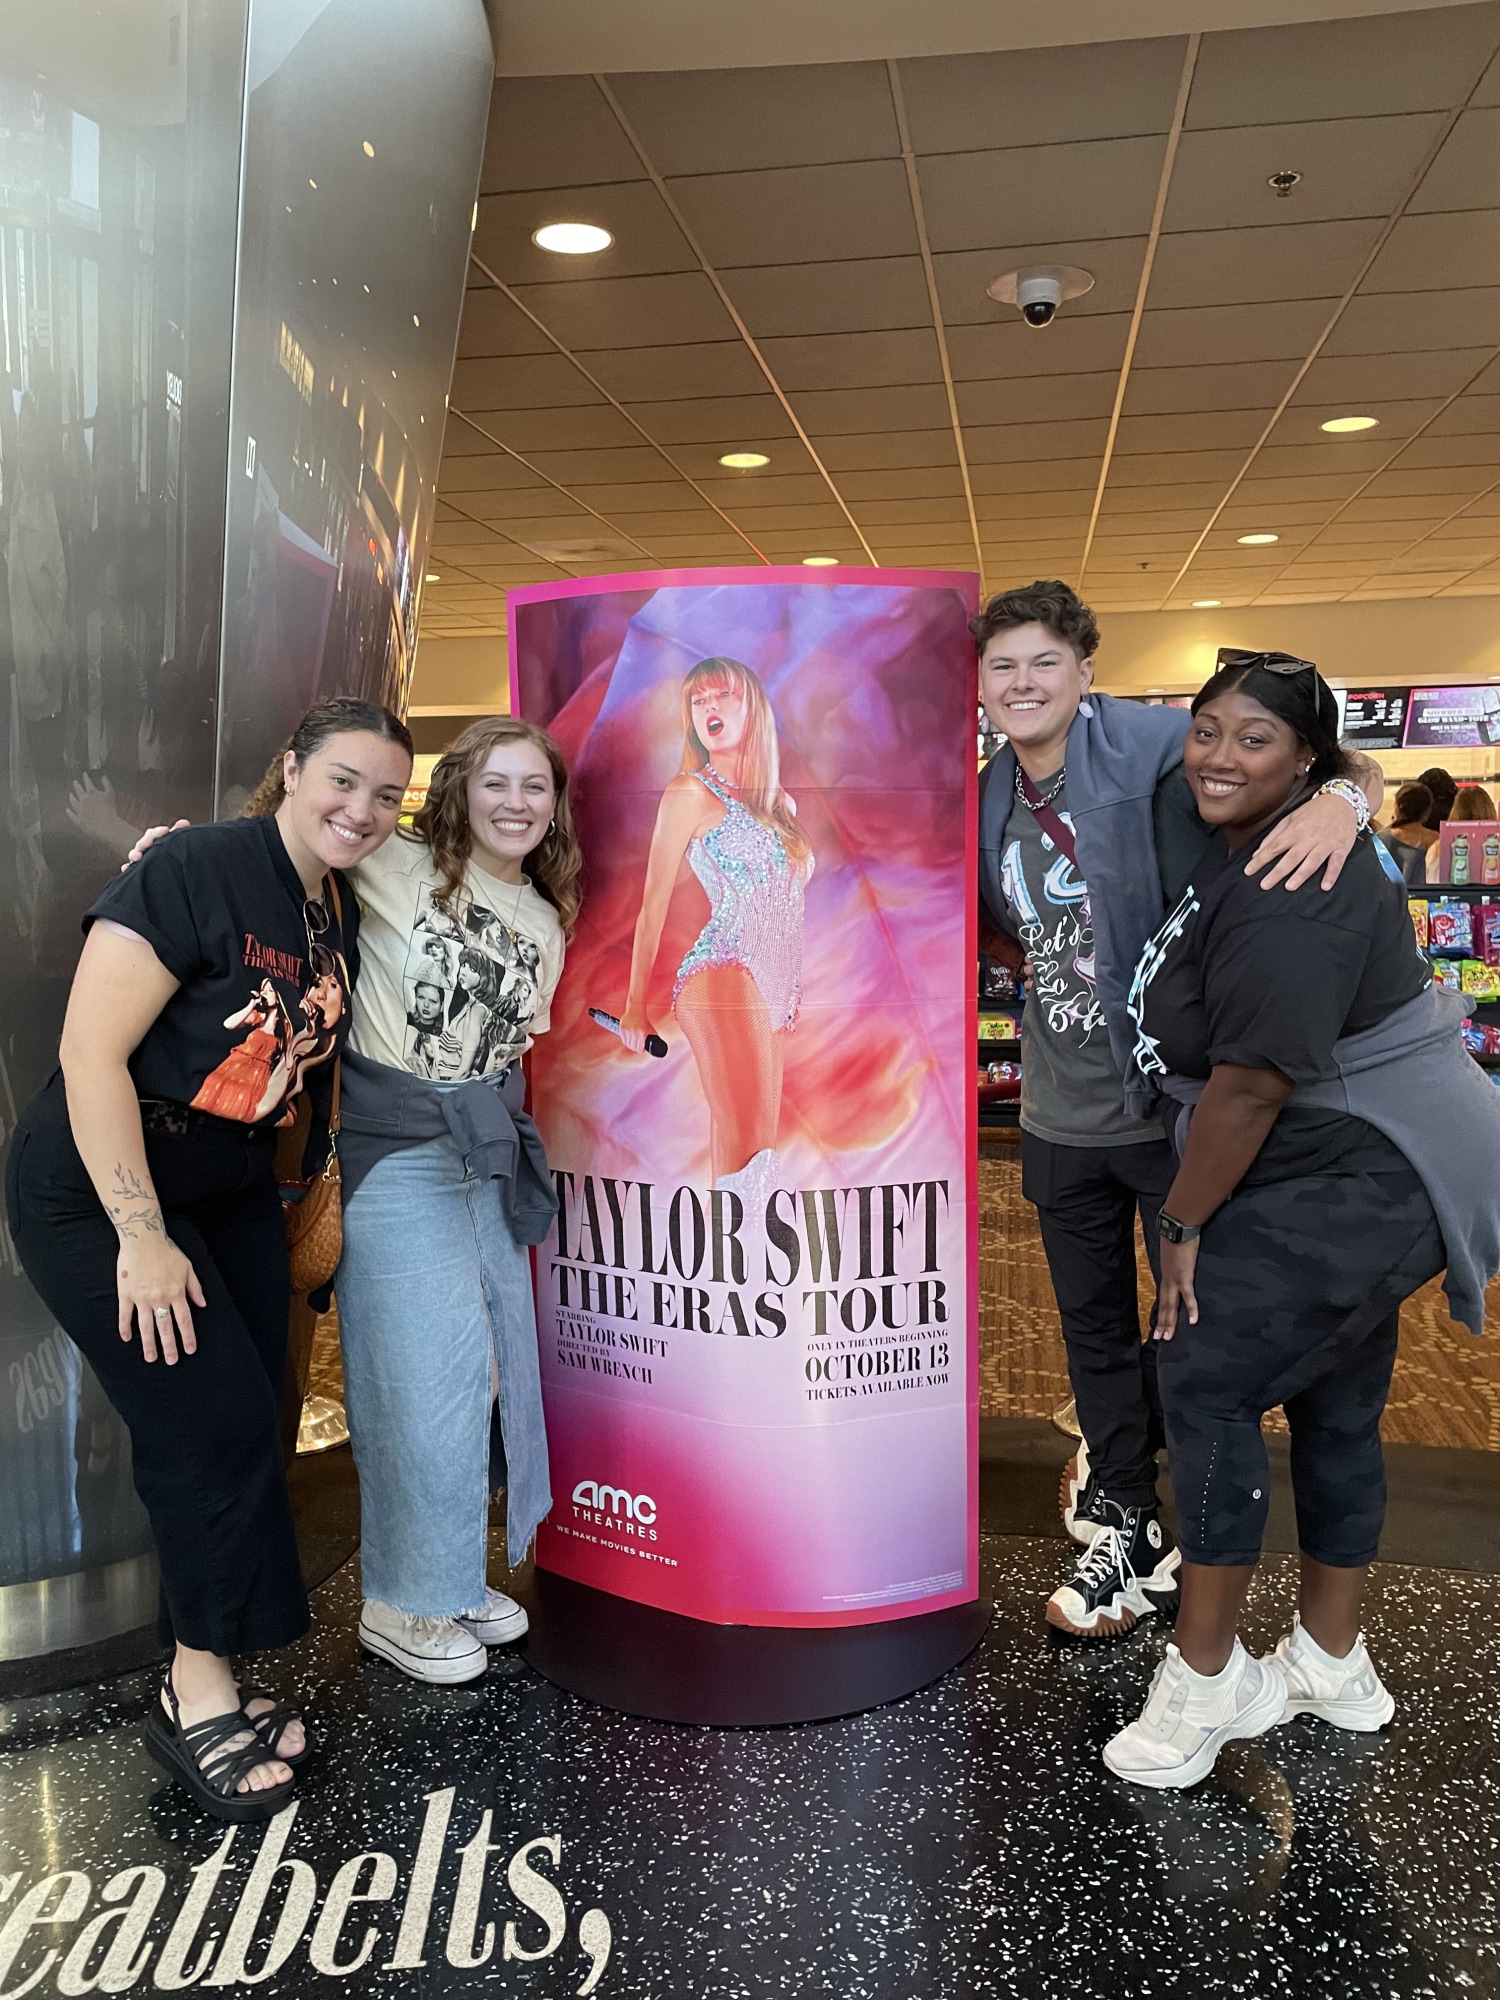 The Taylor Swift Eras Tour Movie Brings the Concert to You